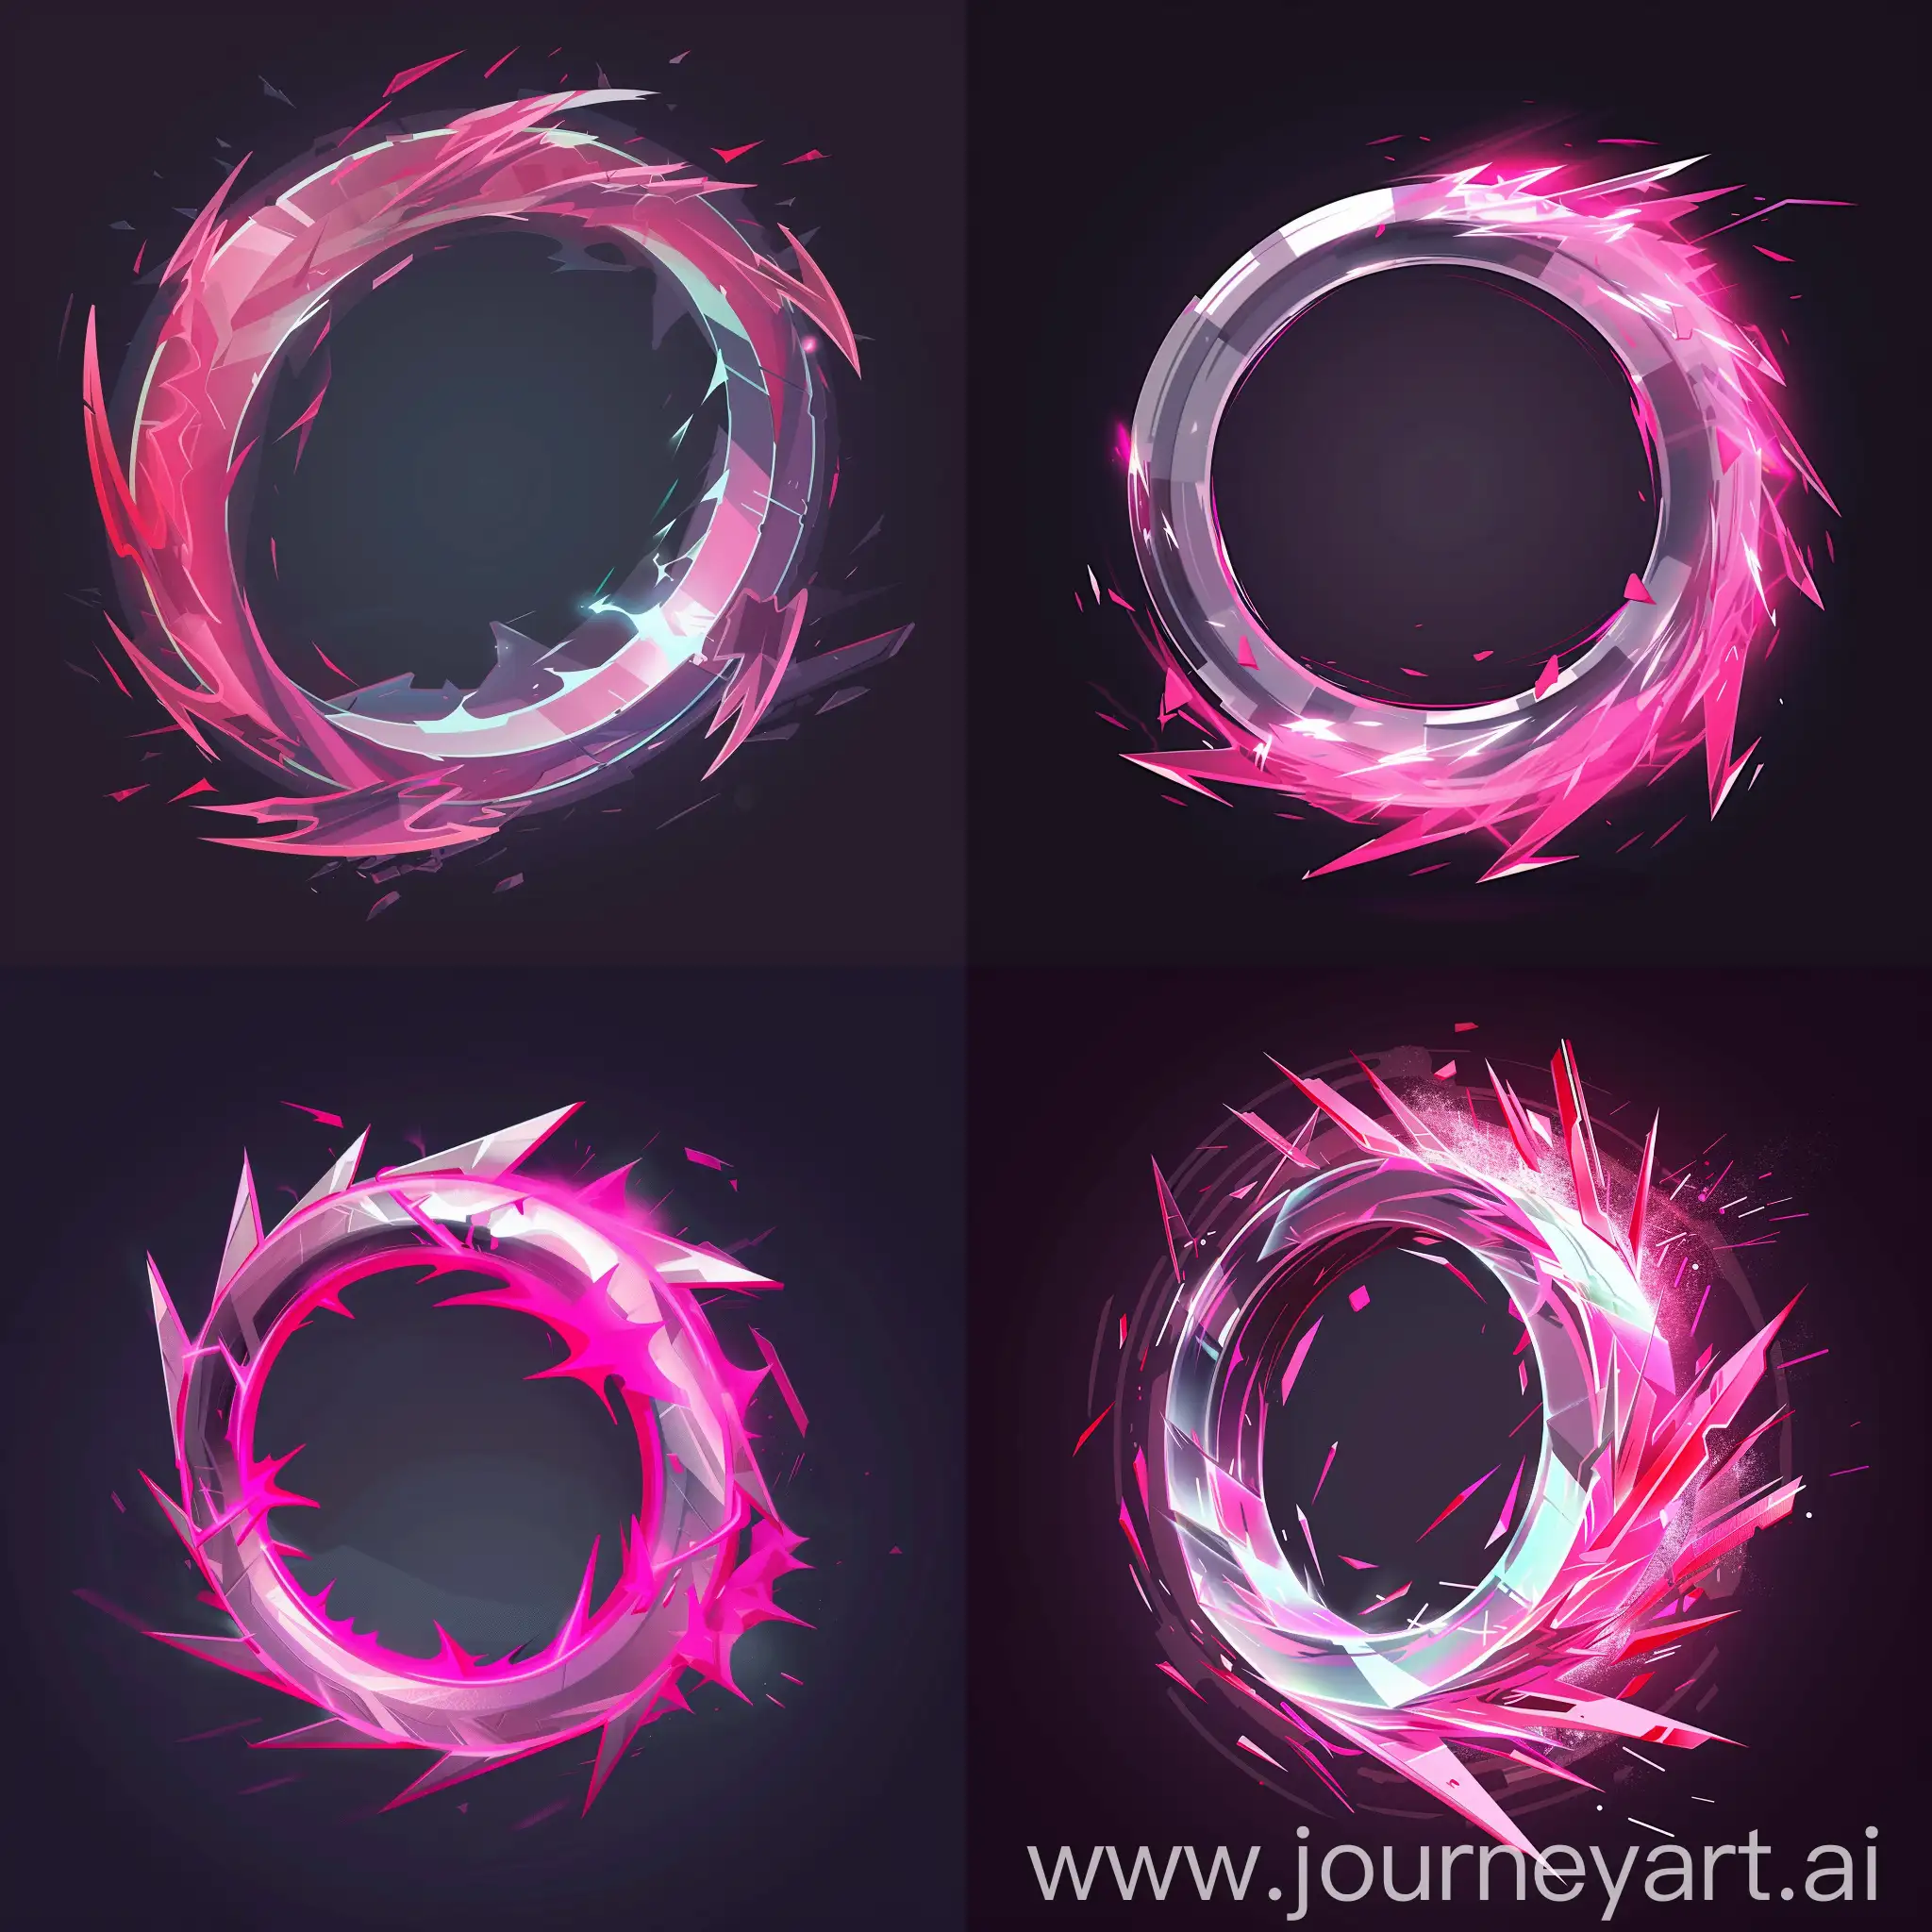 Create an intriguing isometric 2.5D icon for Midjourney, blending elements of sci-fi and cyberpunk with a minimalist and cartoonish aesthetic. The icon should feature a transparent circle with sharp edges, reminiscent of a tornado, but with a futuristic twist. The circle emits a vibrant fuchsia aura, giving it a dynamic and electrifying appearance. This aura embodies a spell-like energy, evoking the ambiance of a sci-fi video game. The background should be dark and mysterious, enhancing the cyberpunk vibe of the scene. Overall, the icon should capture the essence of Midjourney's captivating world, merging fantasy and technology in a visually stunning manner.